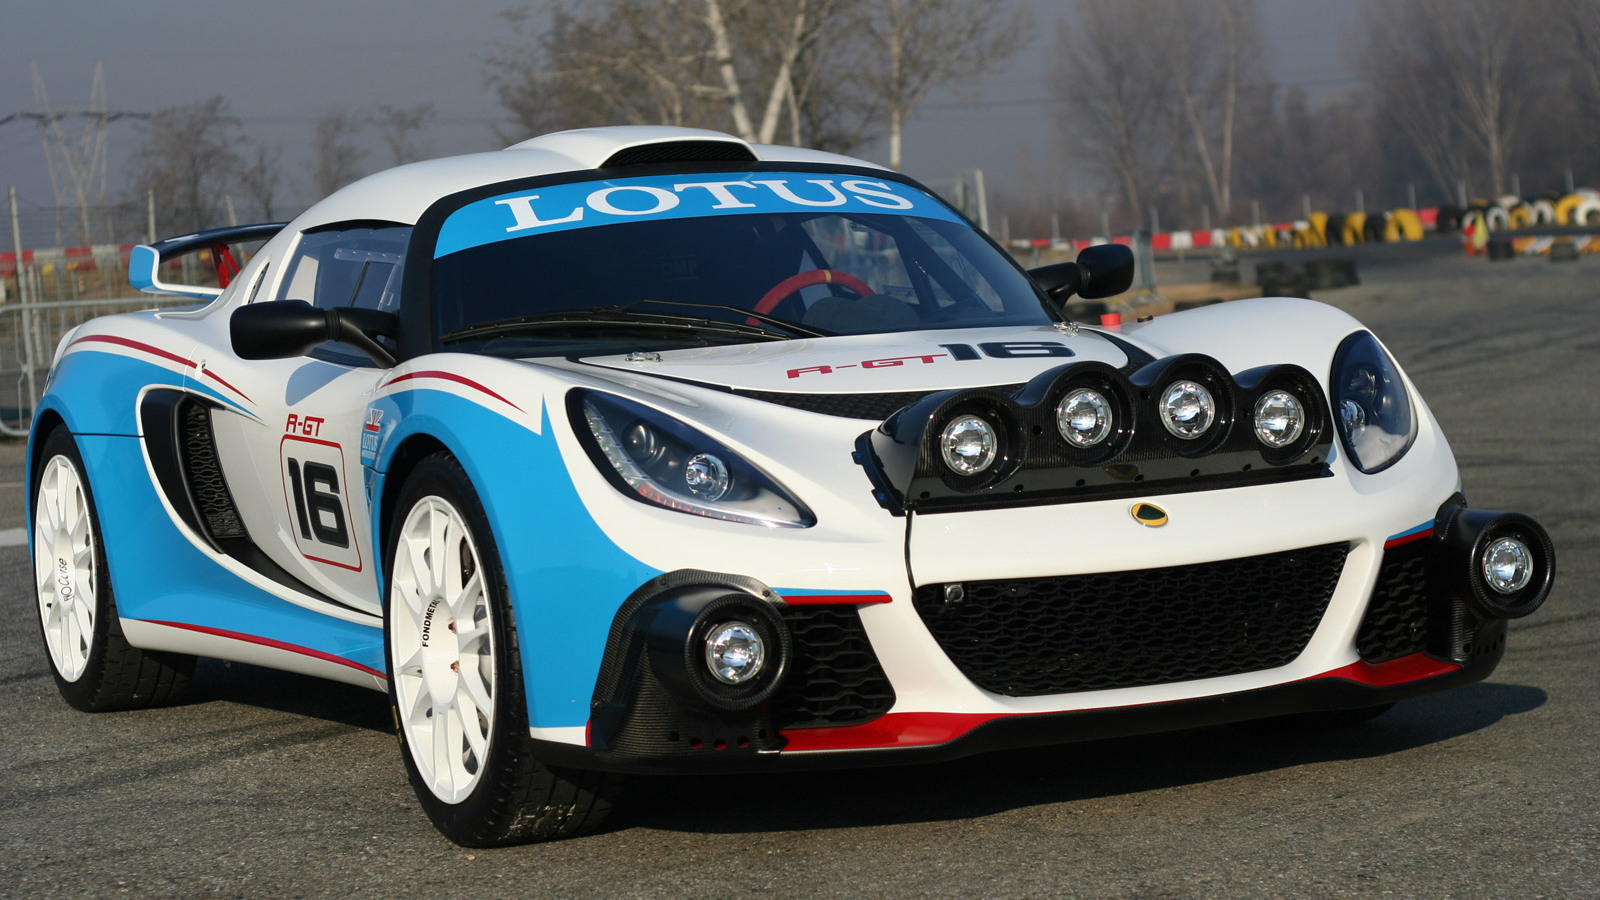 Lotus Exige R-GT rally car first shakedown